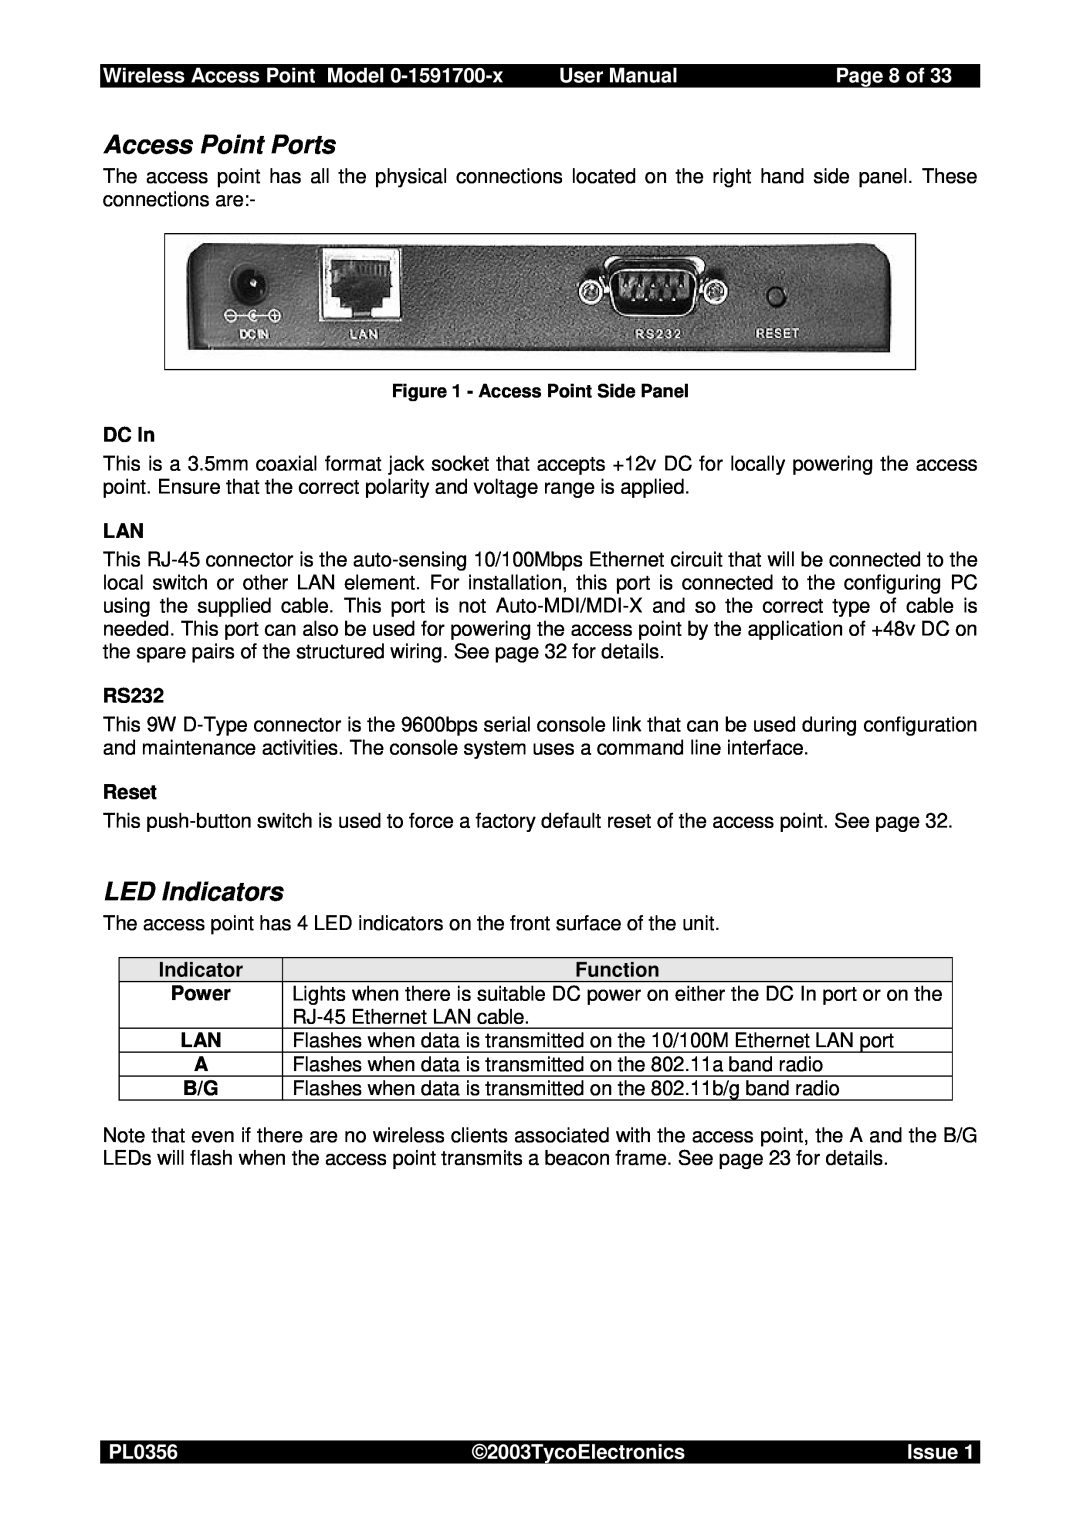 Tyco 0-1591700-x Access Point Ports, LED Indicators, Page 8 of, Wireless Access Point Model, User Manual, PL0356, Issue 